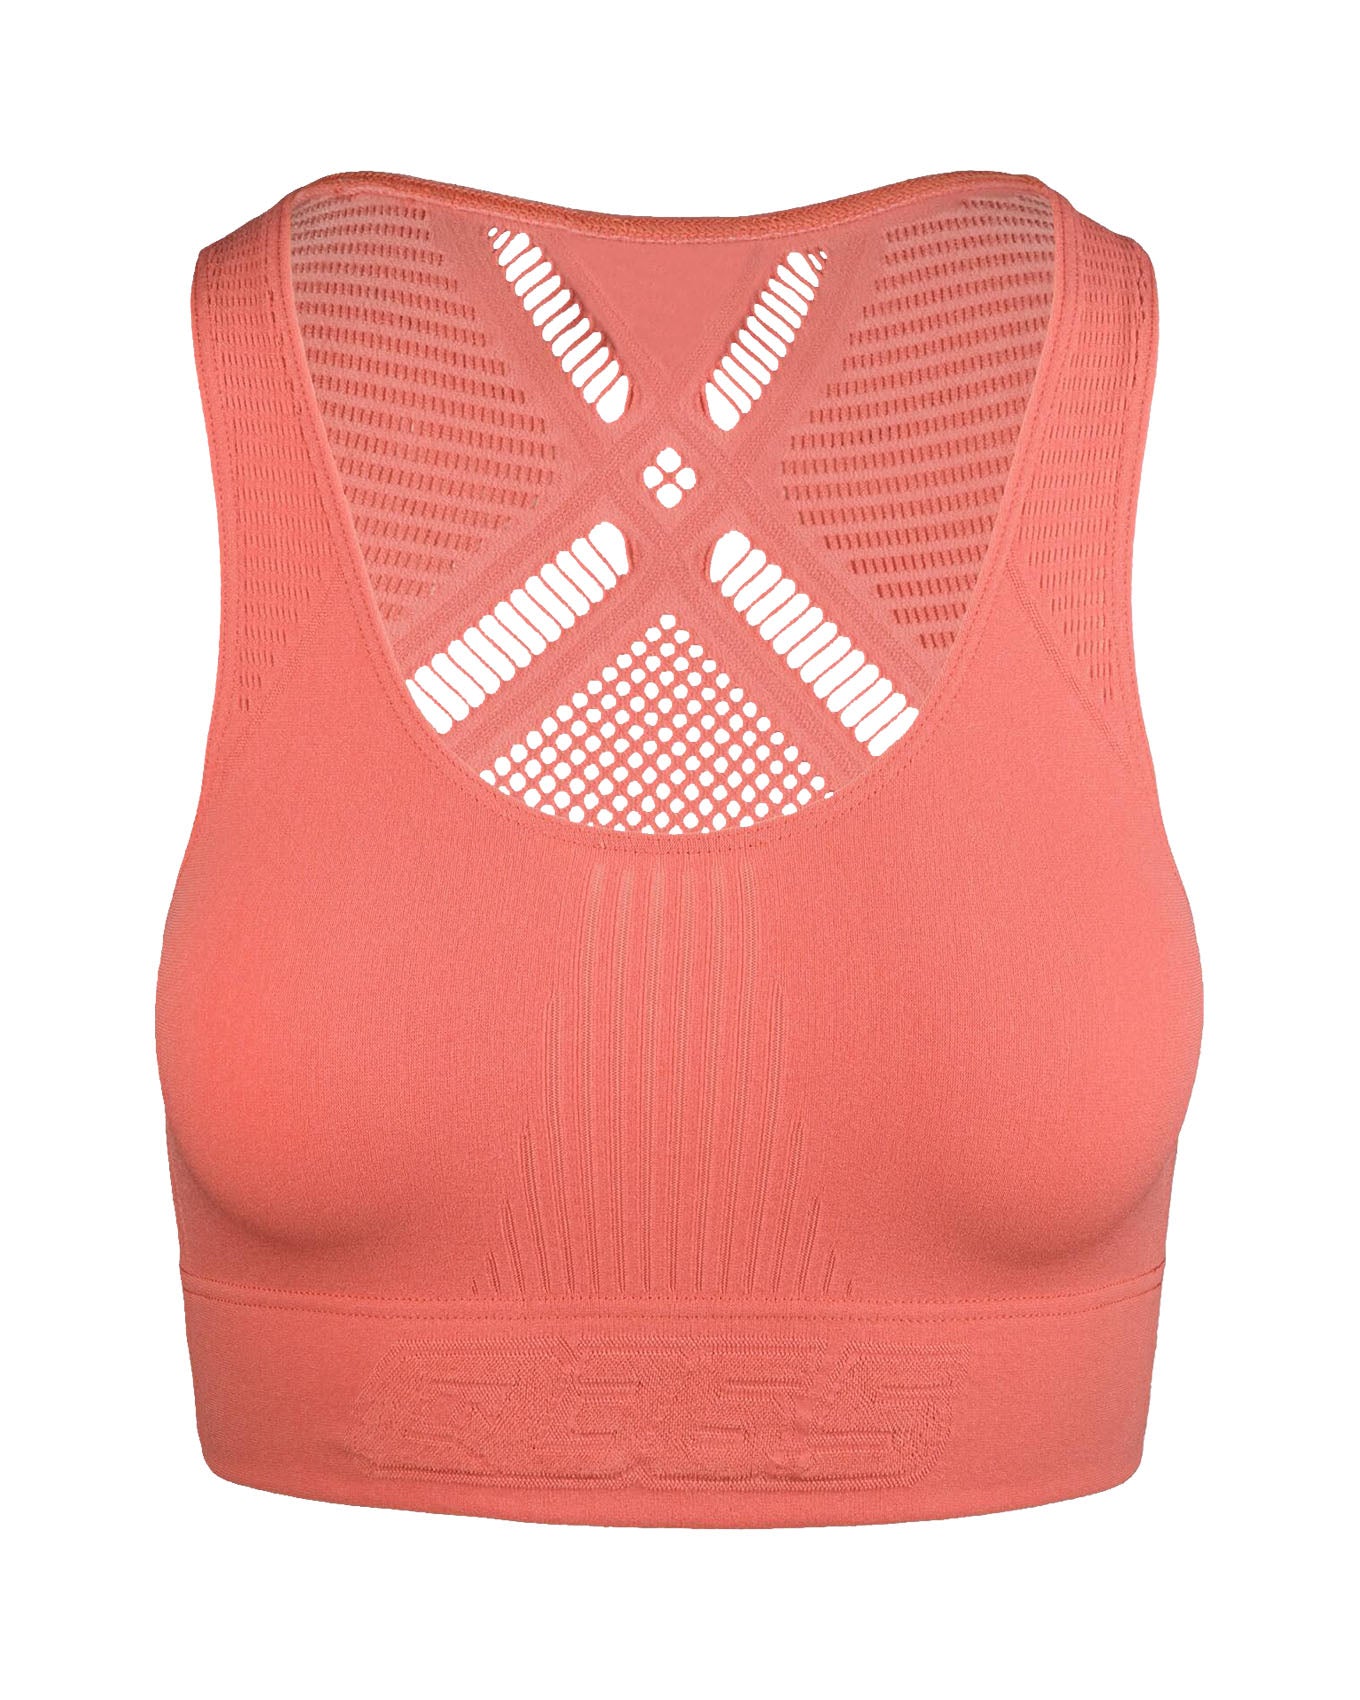 Front Open Is A Seamless Bra